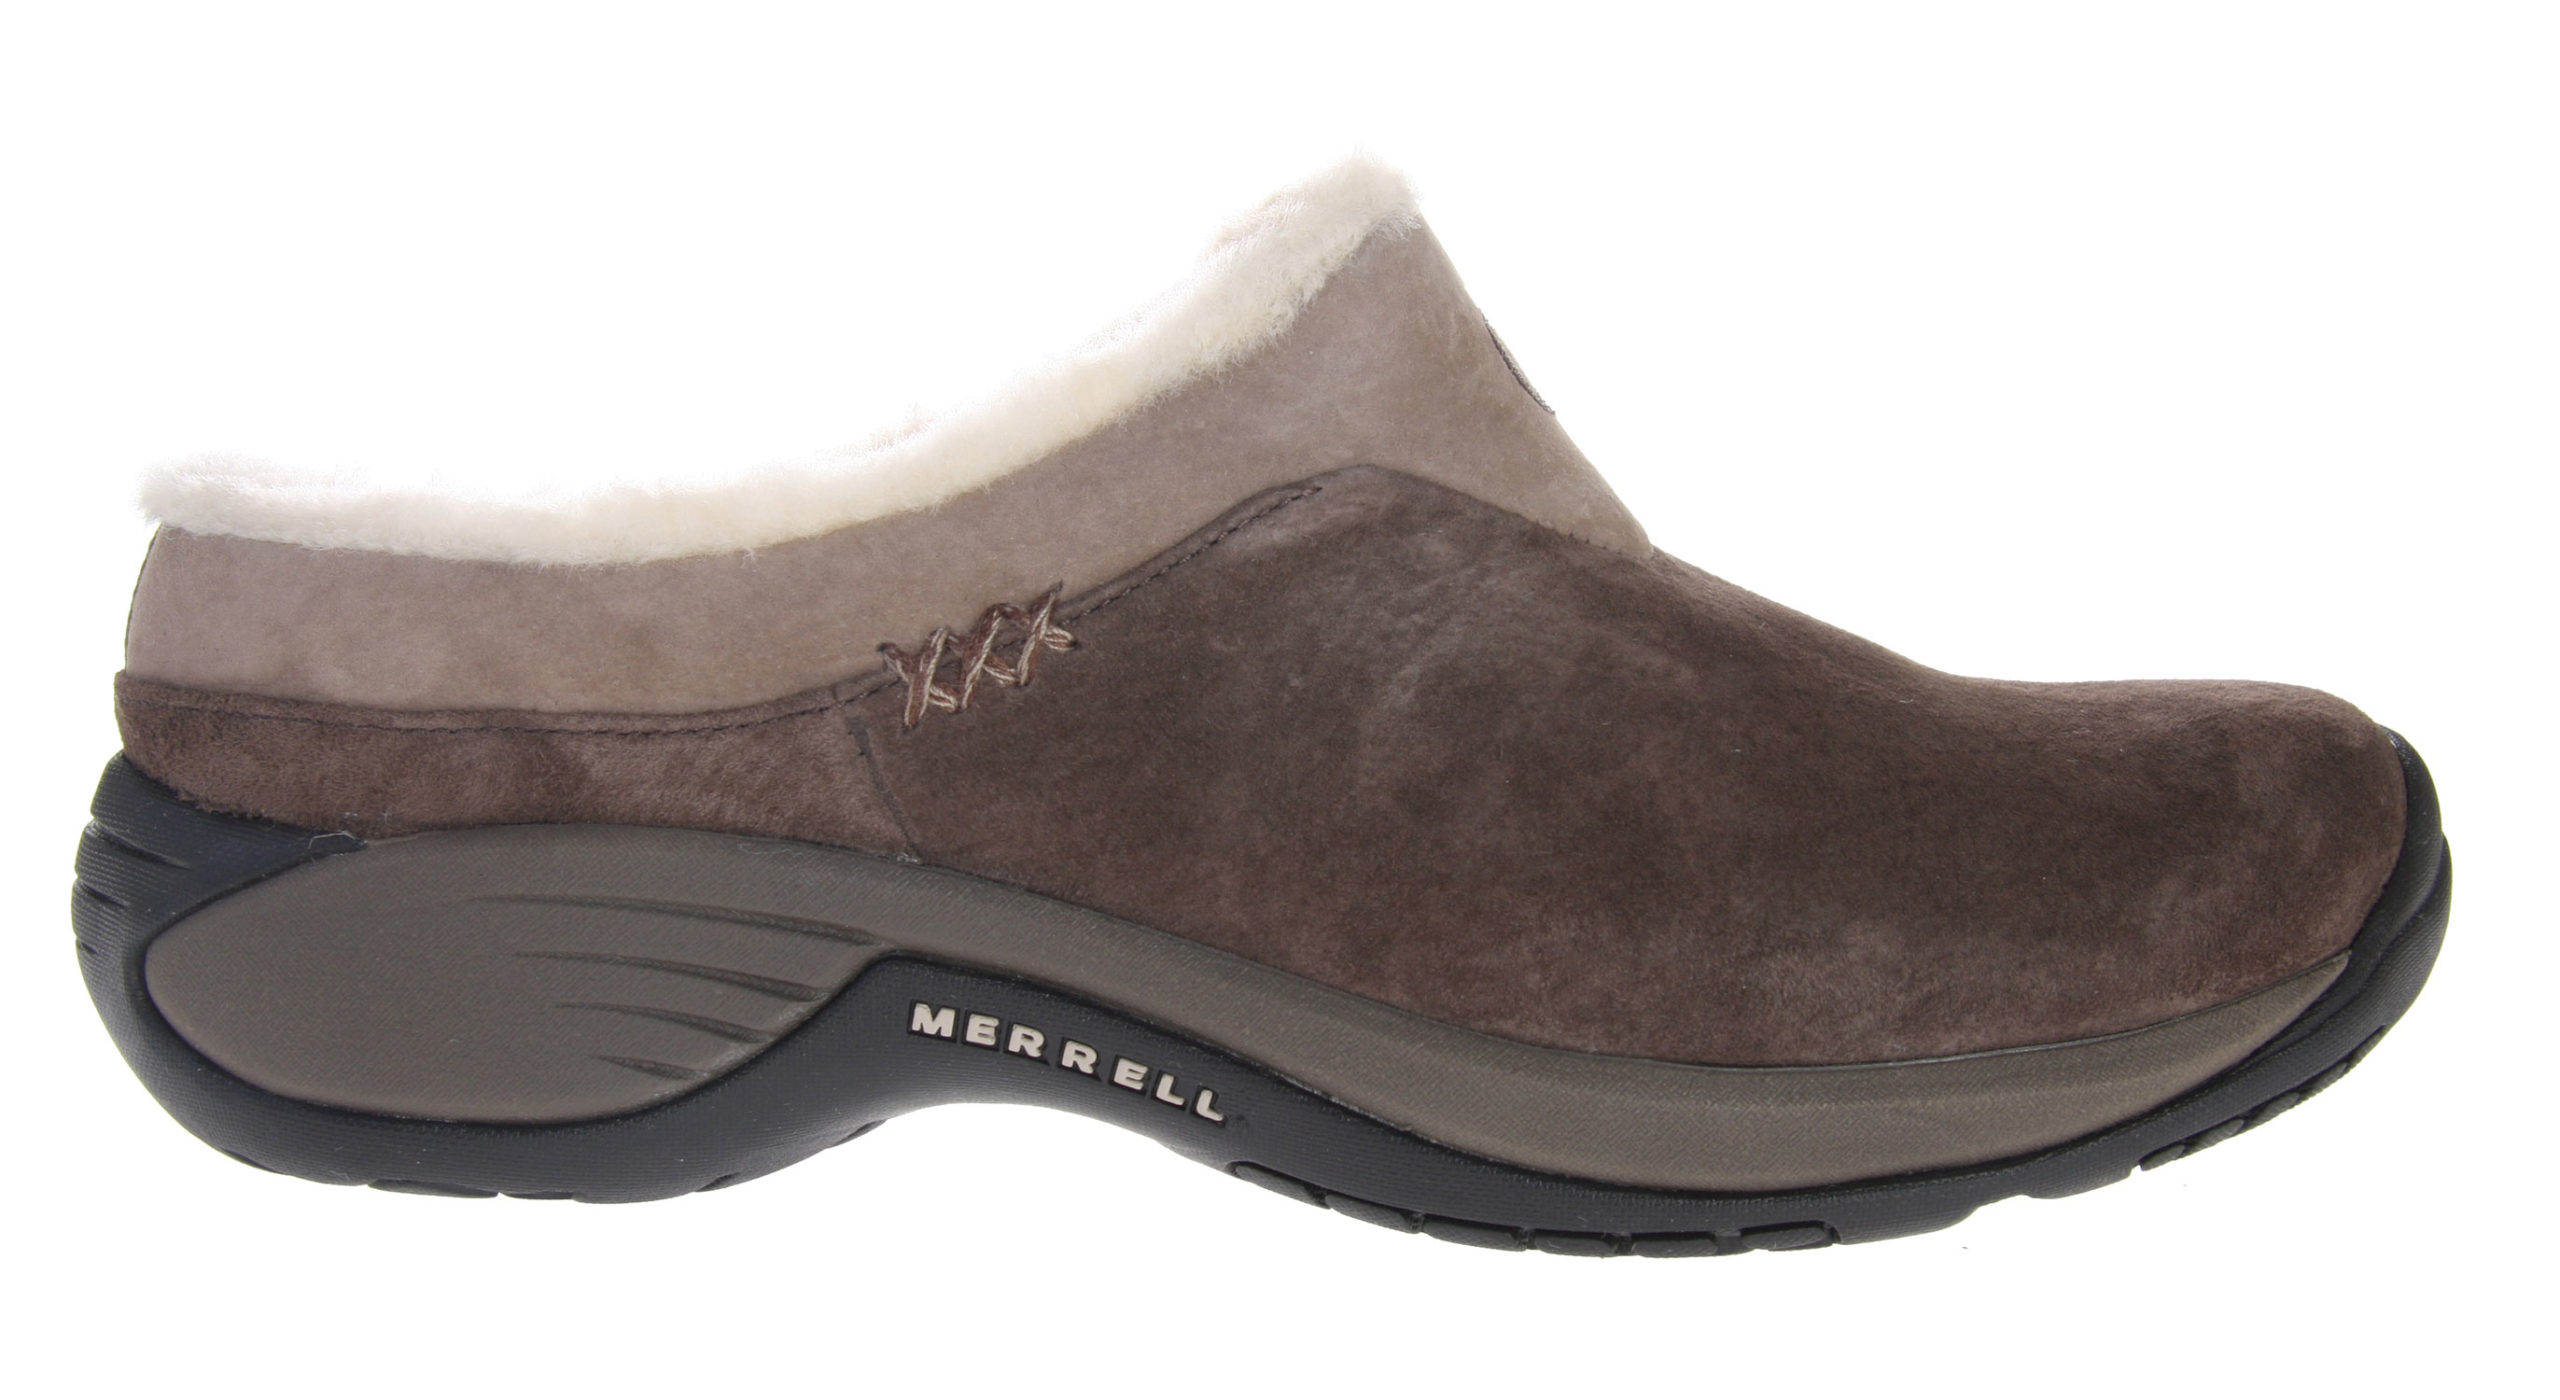 Merrell Encore Ice Shoe Review - The-House